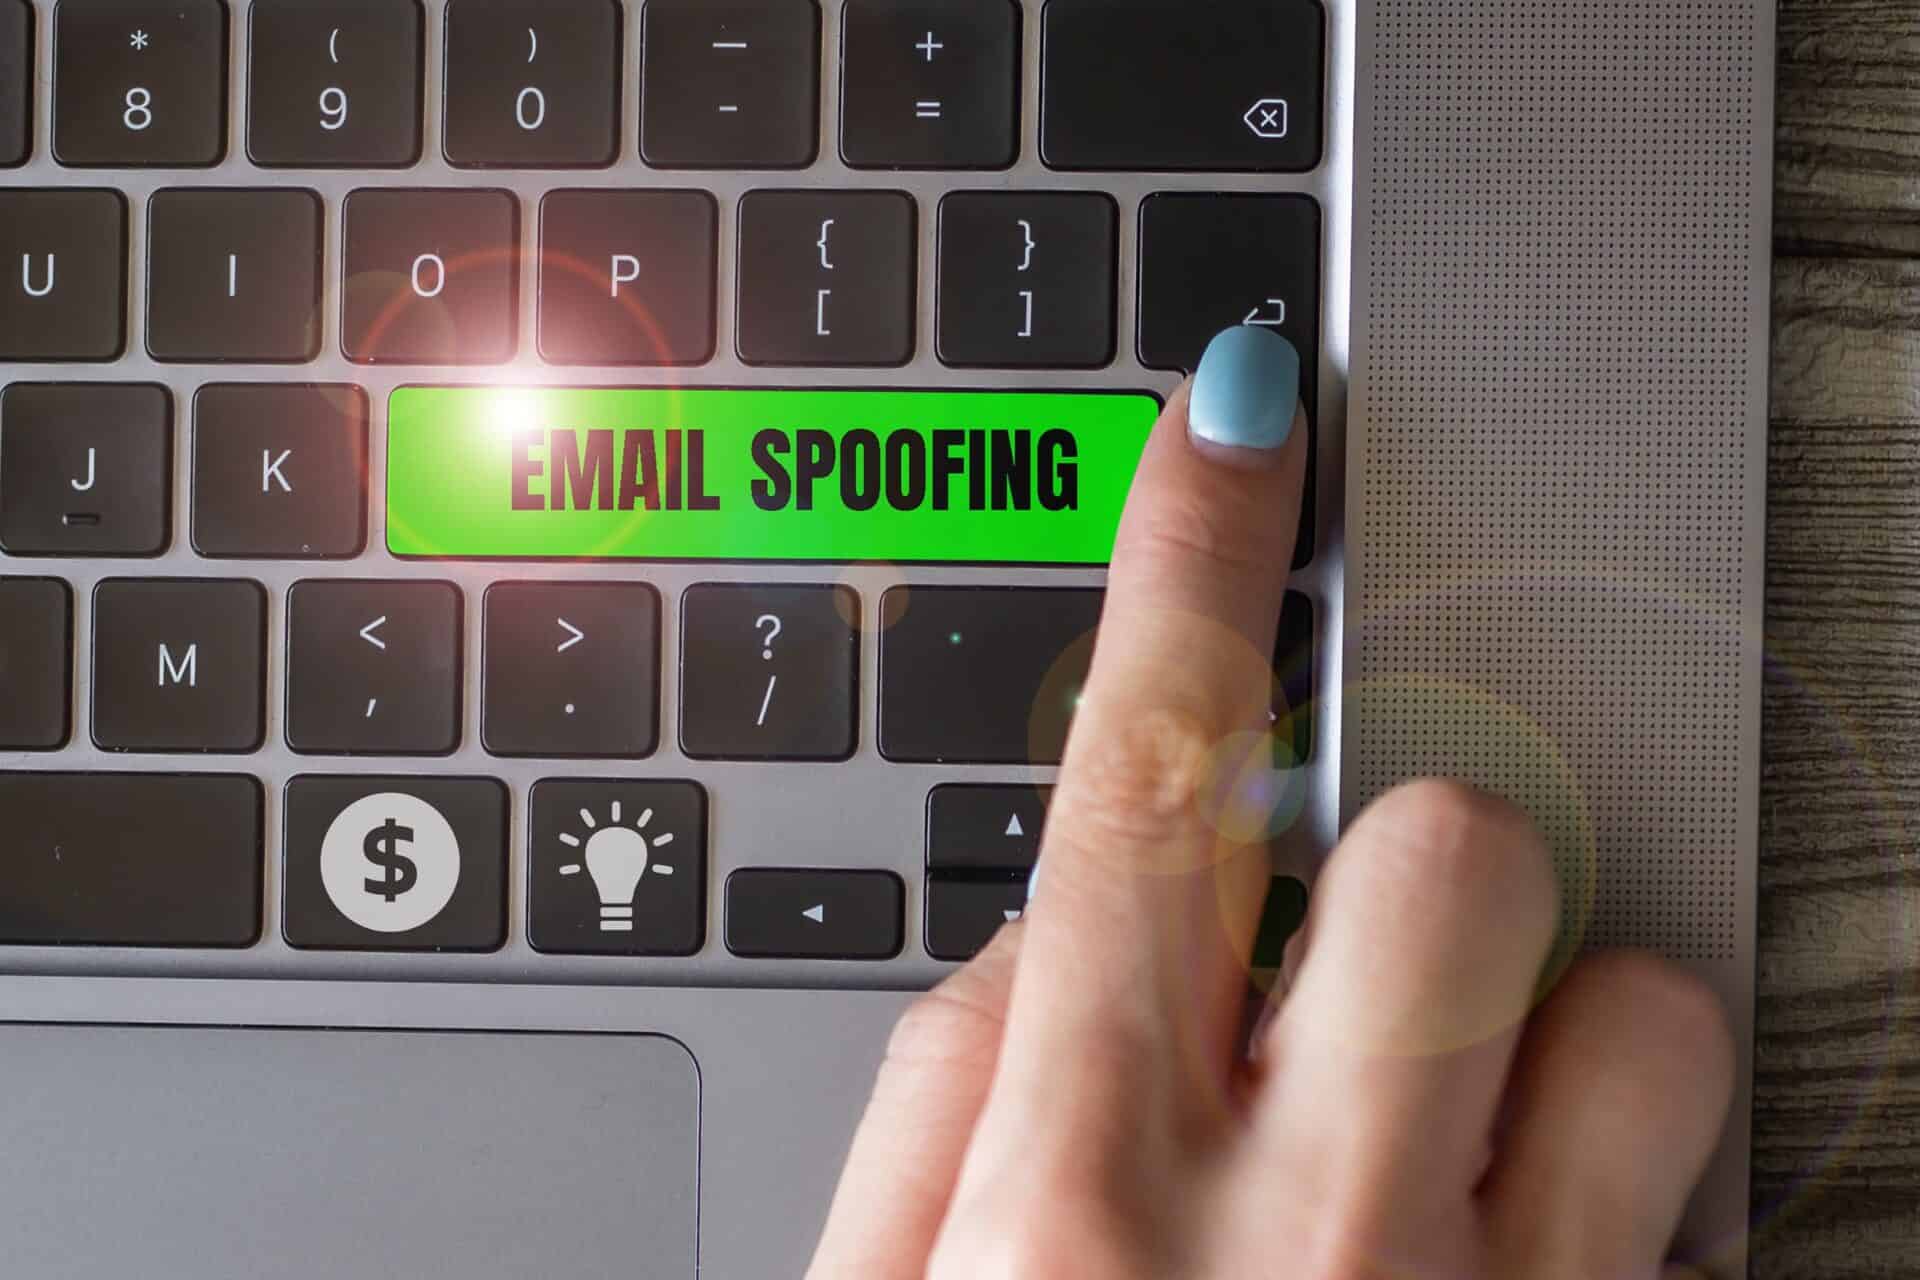 Index finger points at a key with email spoofing written on it.